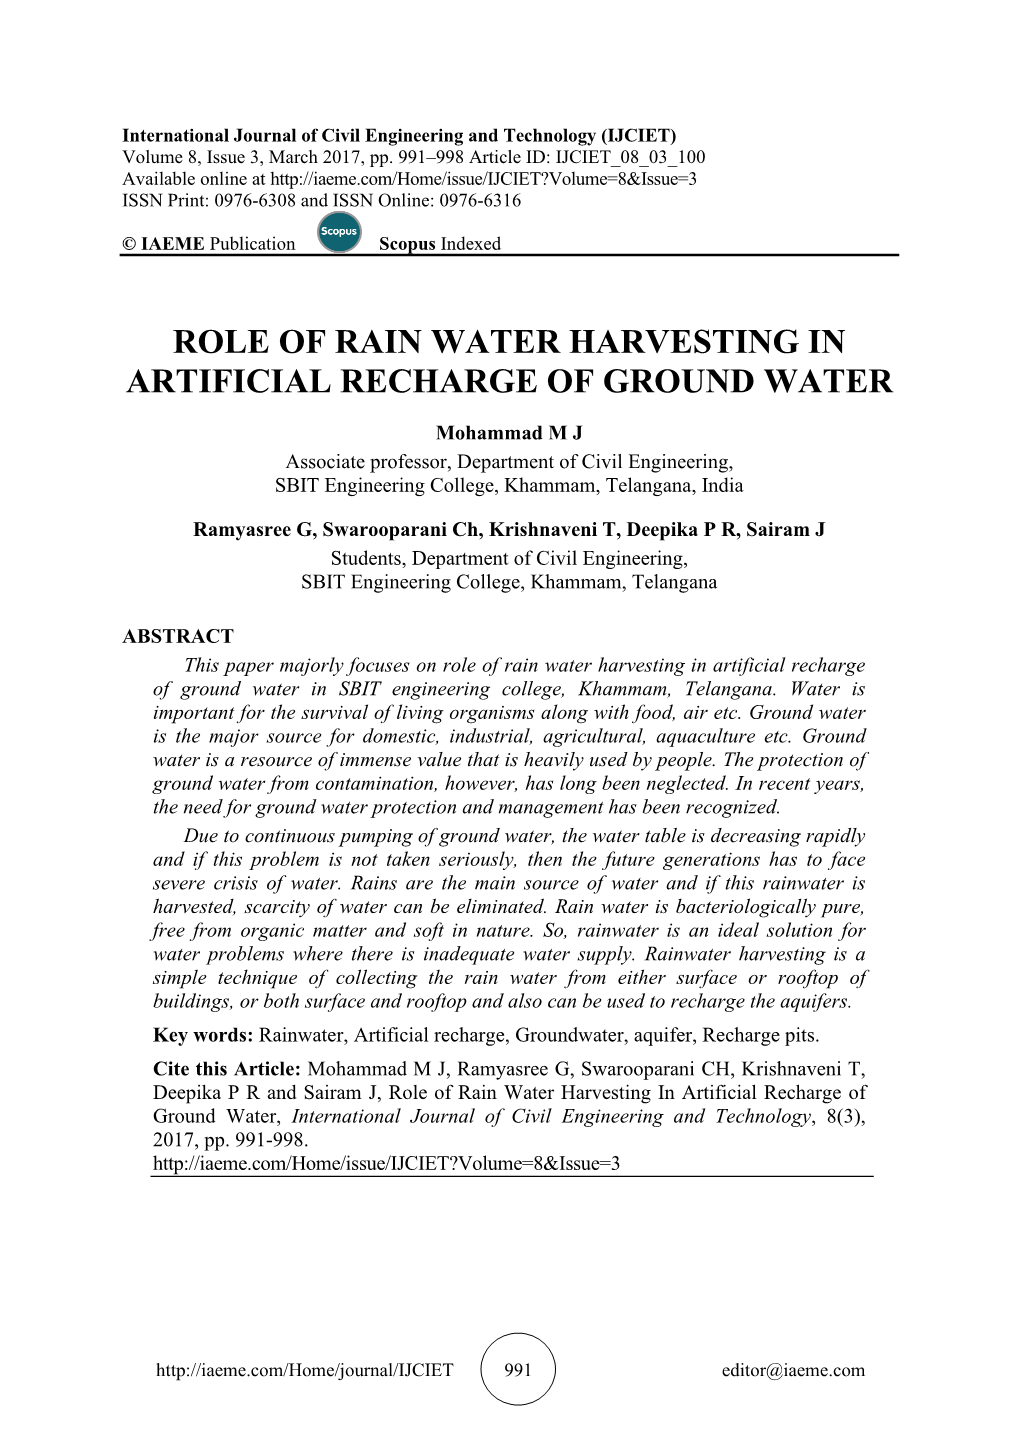 Role of Rain Water Harvesting in Artificial Recharge of Ground Water